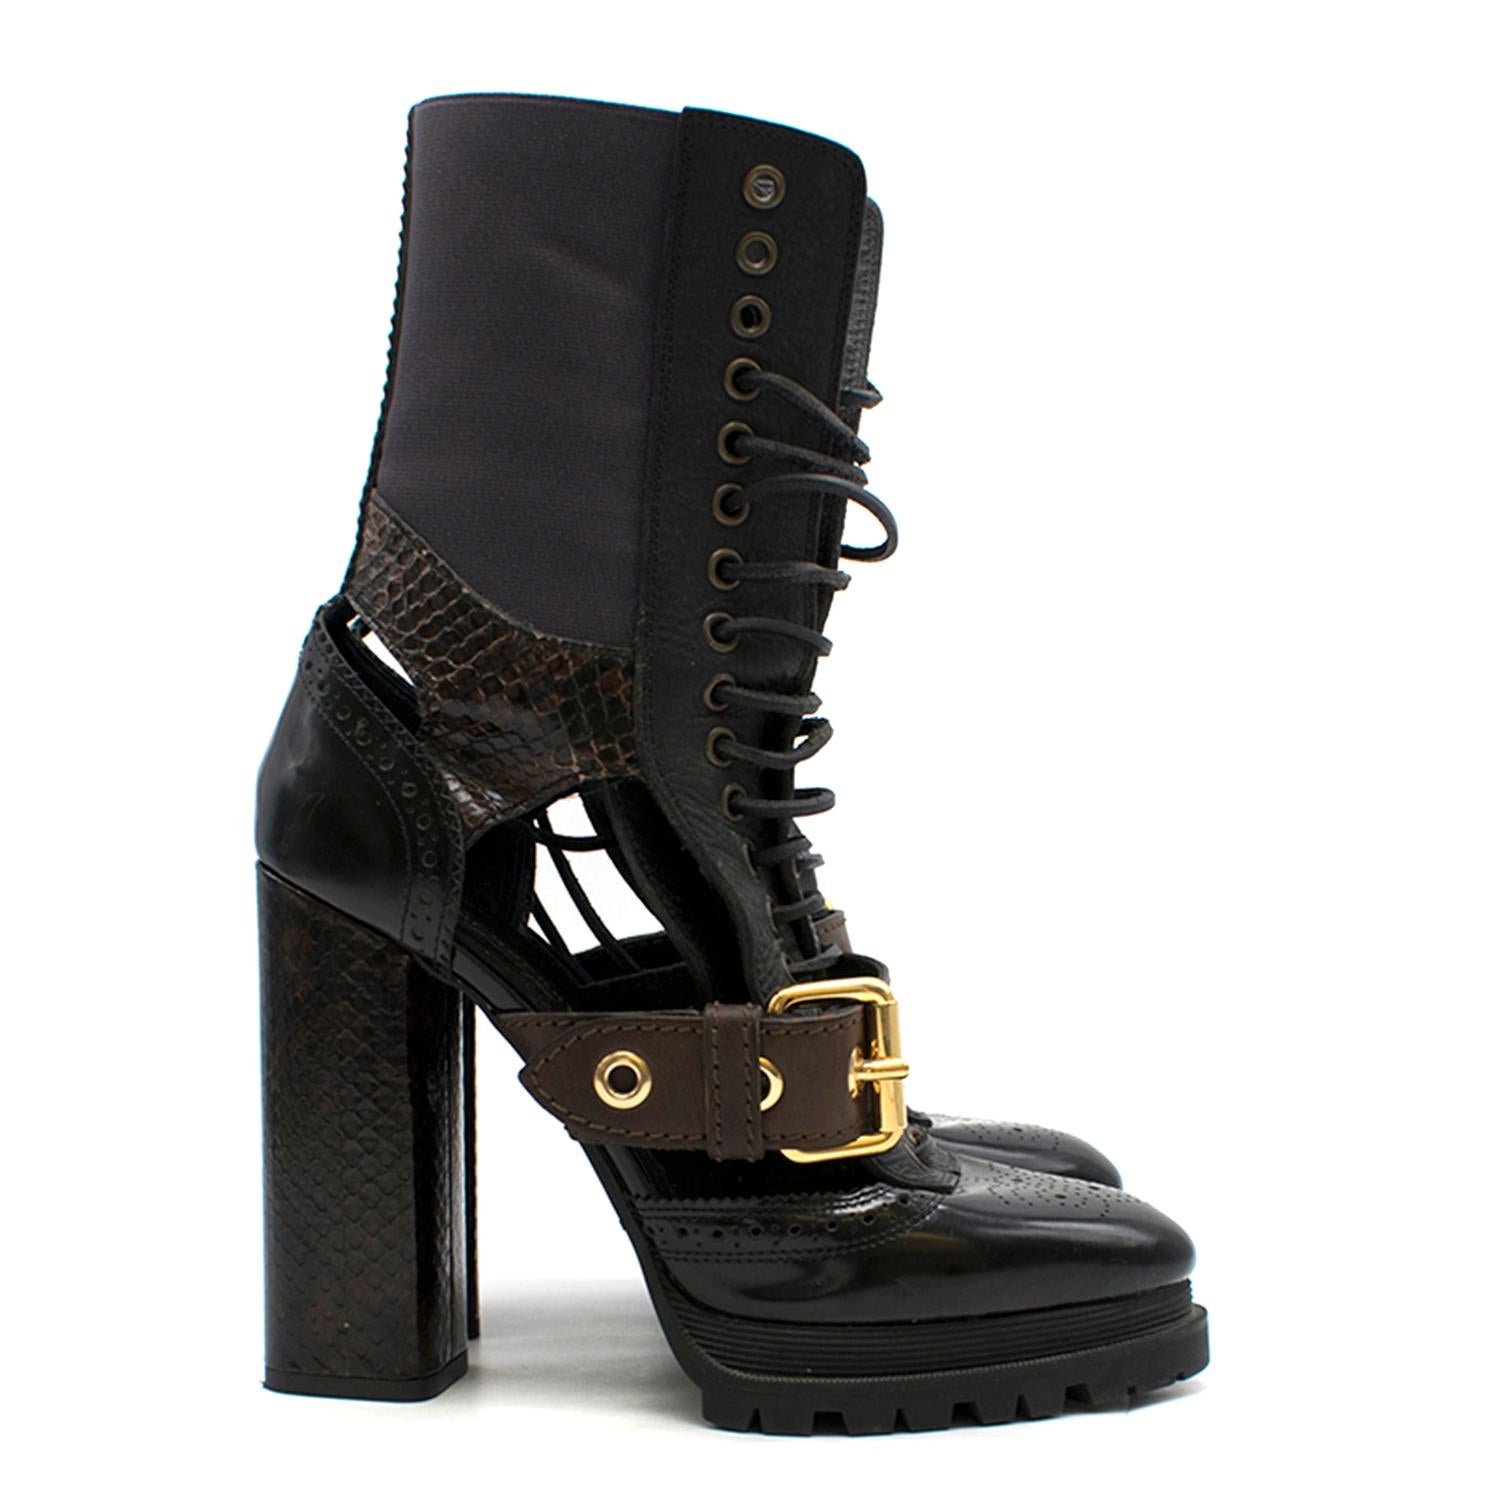 Burberry Lace up Snake Skin Block Heel Boots

-Black leather, mid weight
-Brown snake print detail on heel and near ankle
-Brown leather and gold 
hardware buckle 
-Purple mid-calf stretchy panels
-Rubber soles
-Black leather lace up